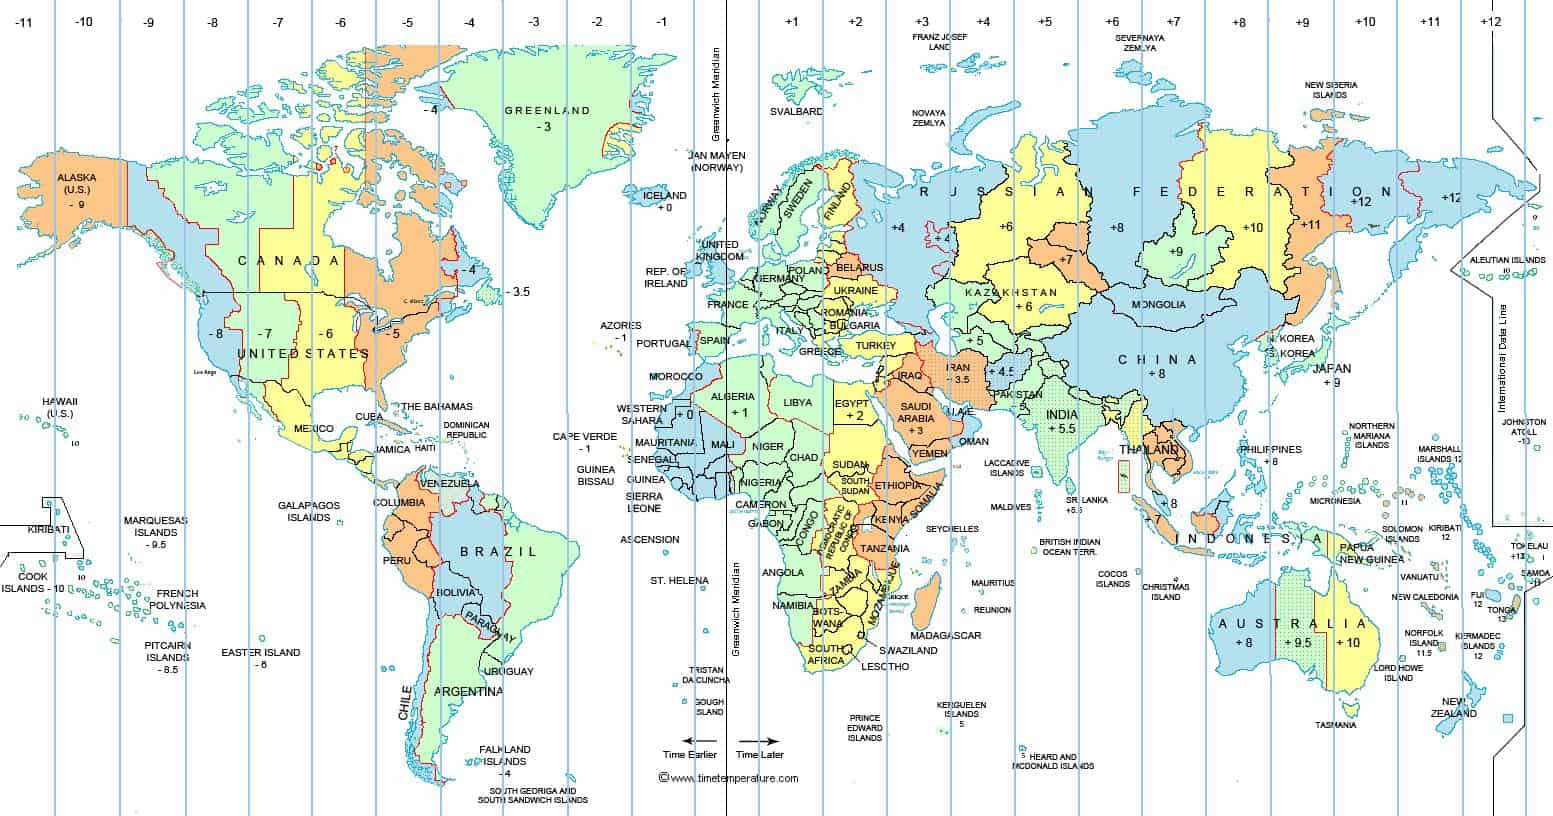 Time Offset and Time Zones